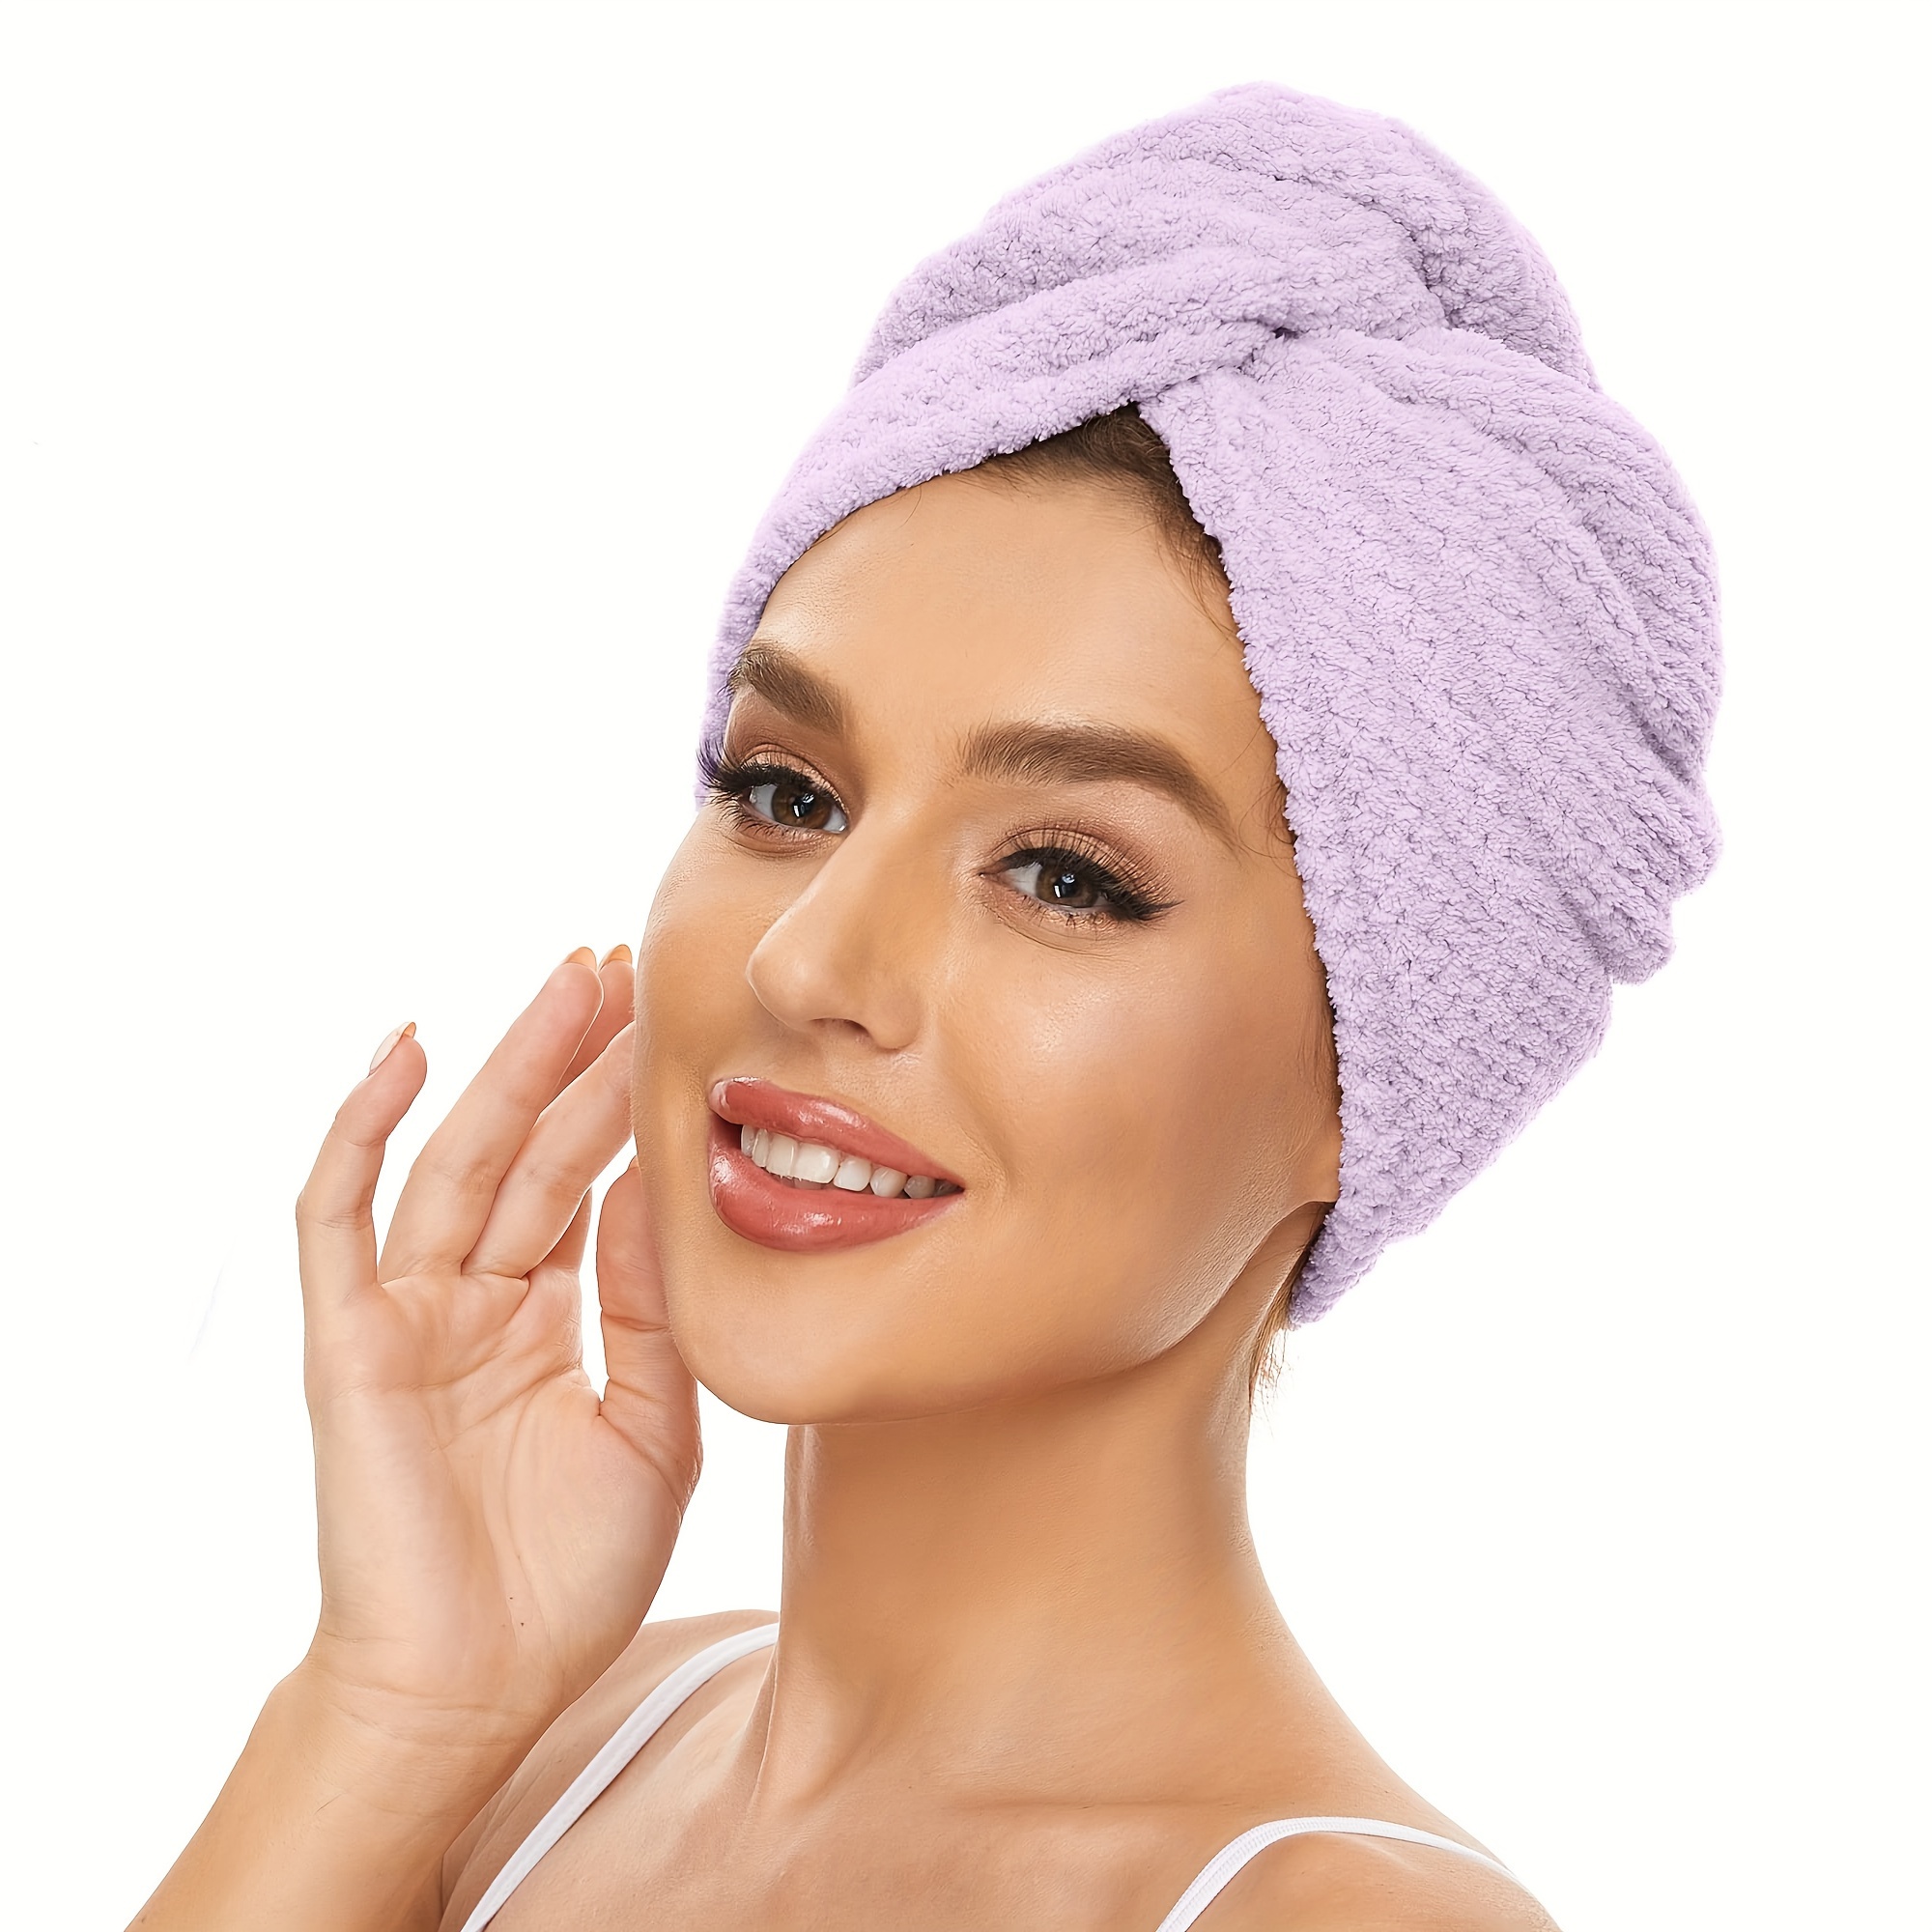 Large Microfiber Hair Towel Wrap for Women, Anti Frizz Hair Drying Towel  with Elastic Strap, Fast Drying Hair Turbans for Wet Hair, Long, Thick,  Curly Hair, Super Soft Hair Wrap Towels Dark